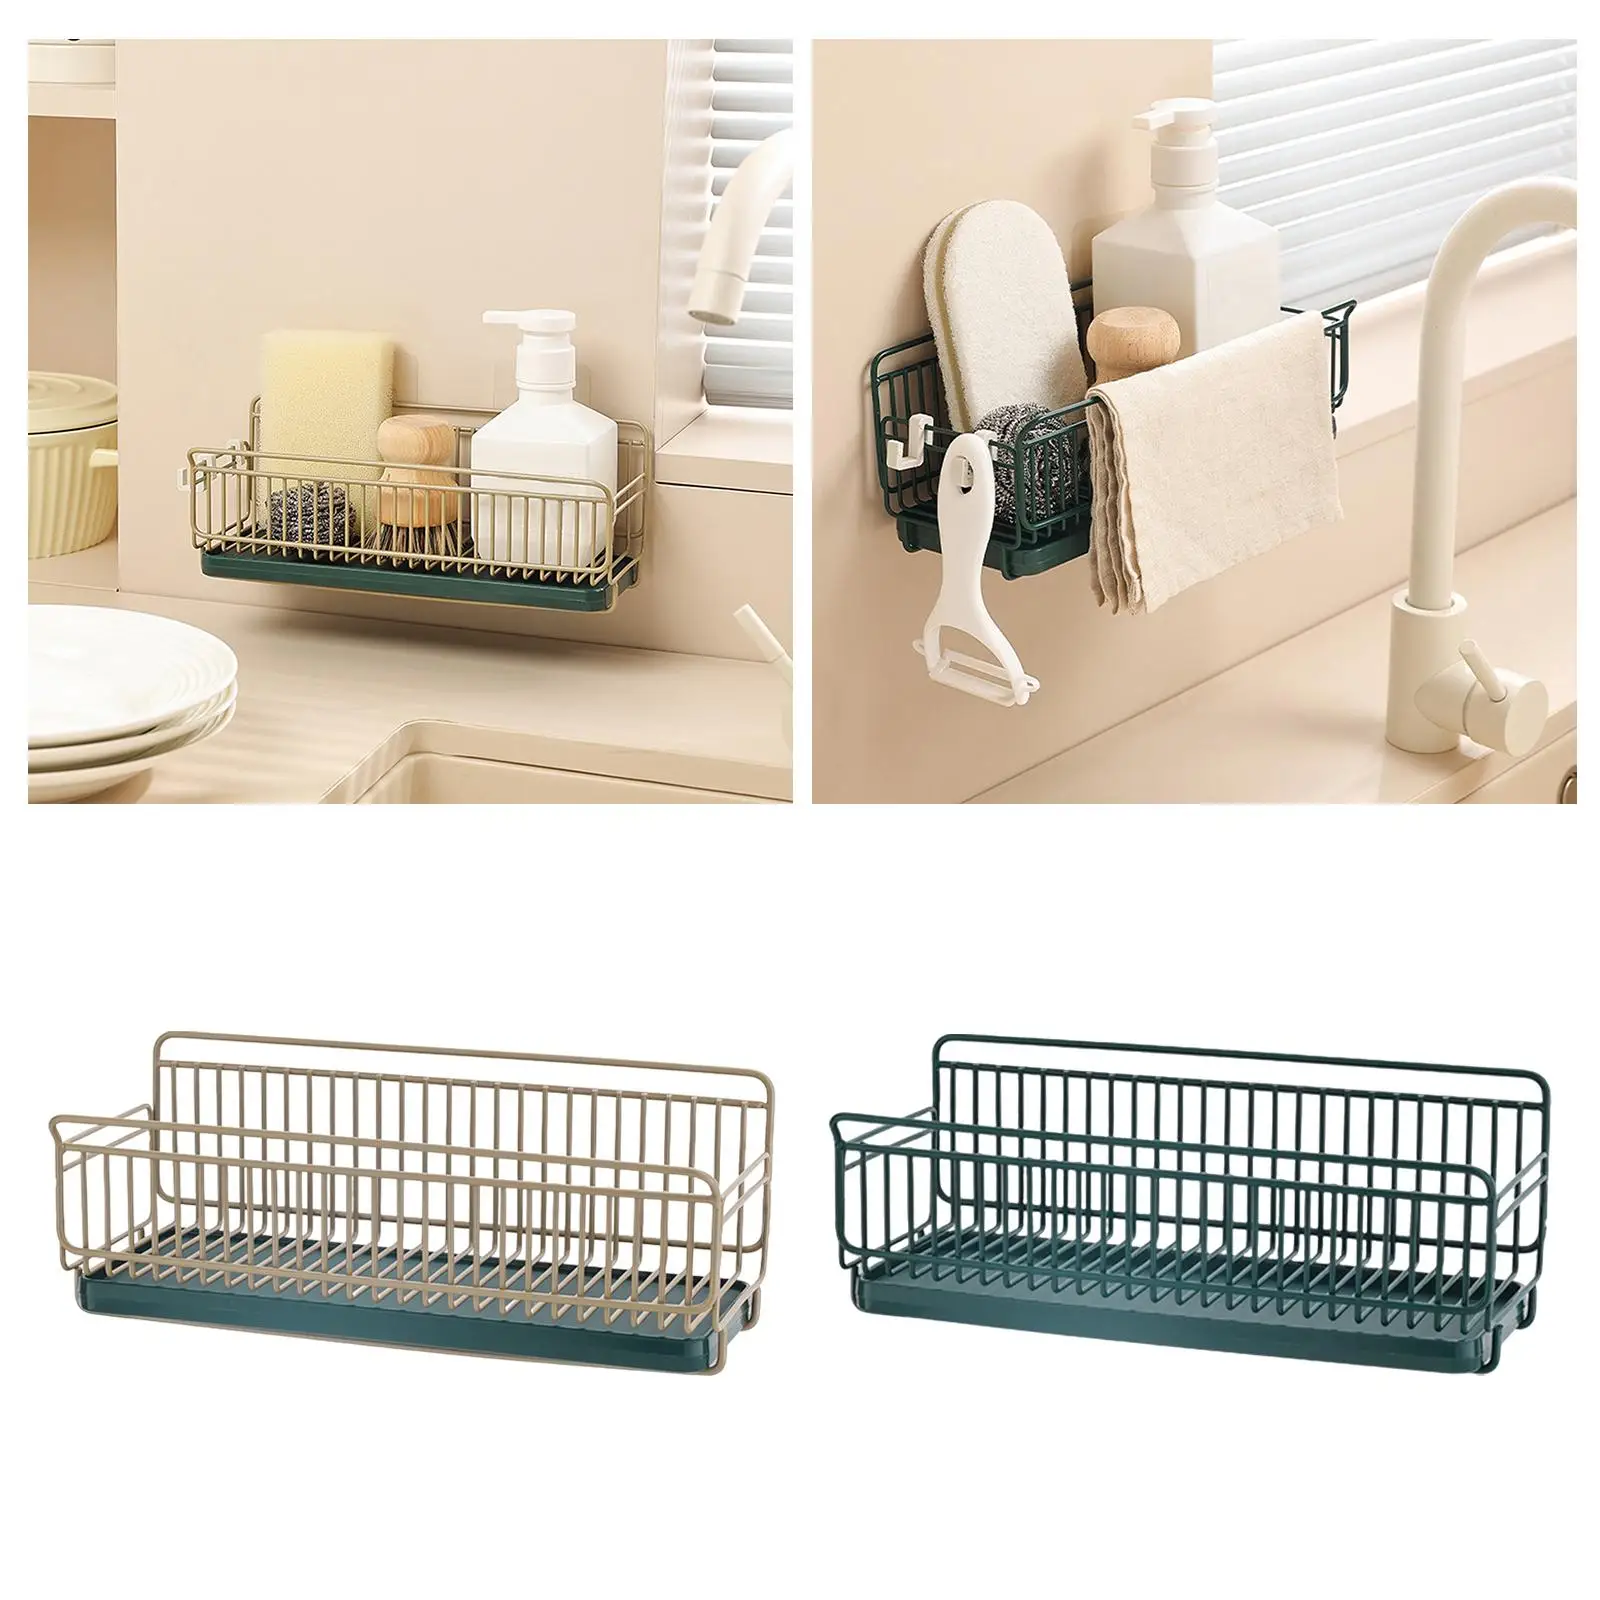 Soap Dispenser Scouring Pad Organizer Kitchen Sink Rack Organizer Countertop Soap Tray for Bathroom Storage Living Room Counter